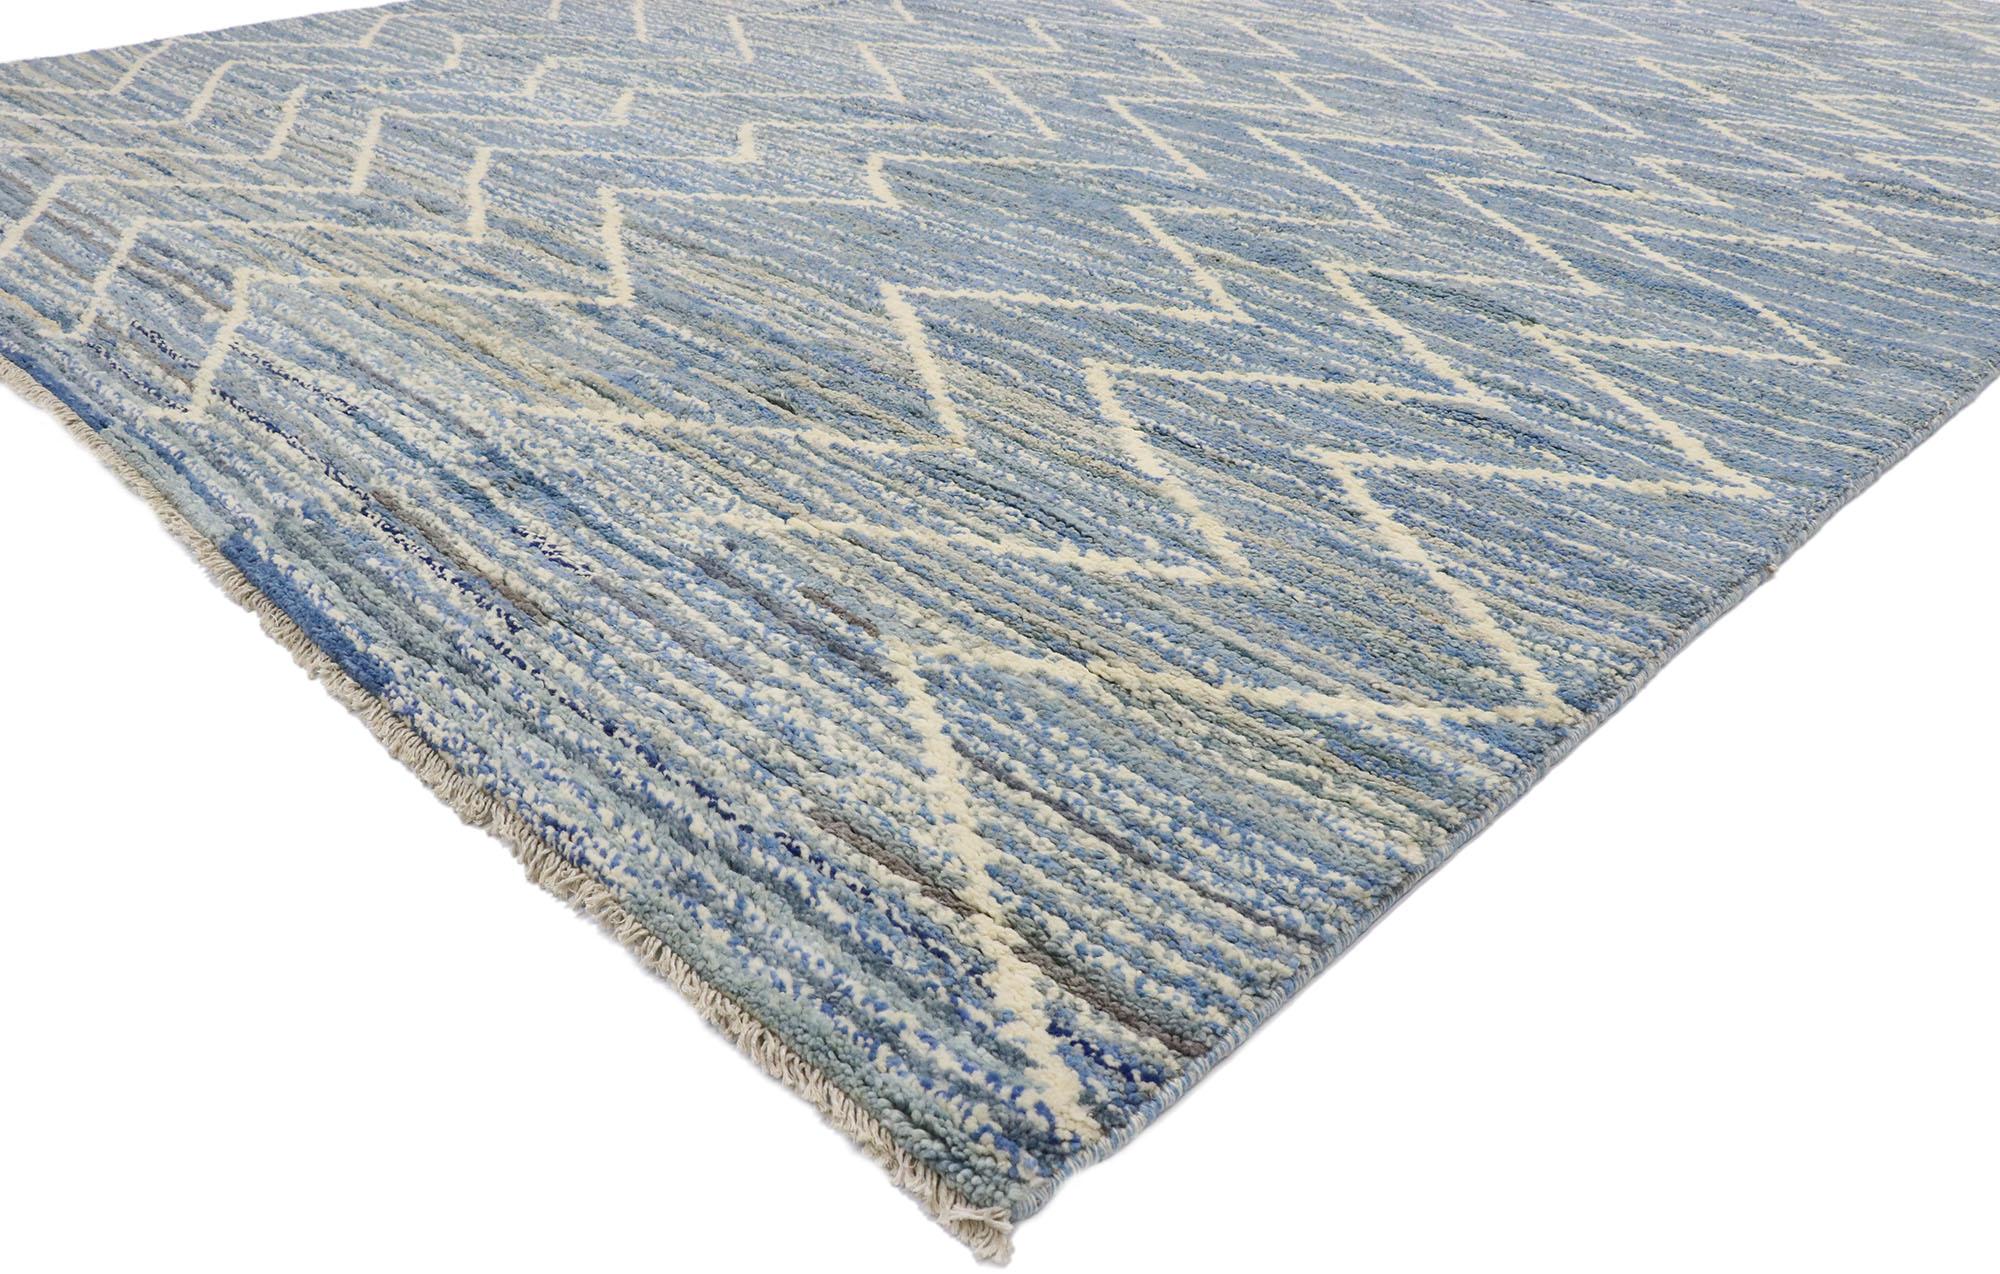 80642 Modern Blue Moroccan Rug, 10'03 x 13'09.  In this hand-knotted wool contemporary Moroccan style area rug, luminous blue hues intermingle with gracious gray tones, crafting an endlessly fascinating visual display. Throughout its expanse,